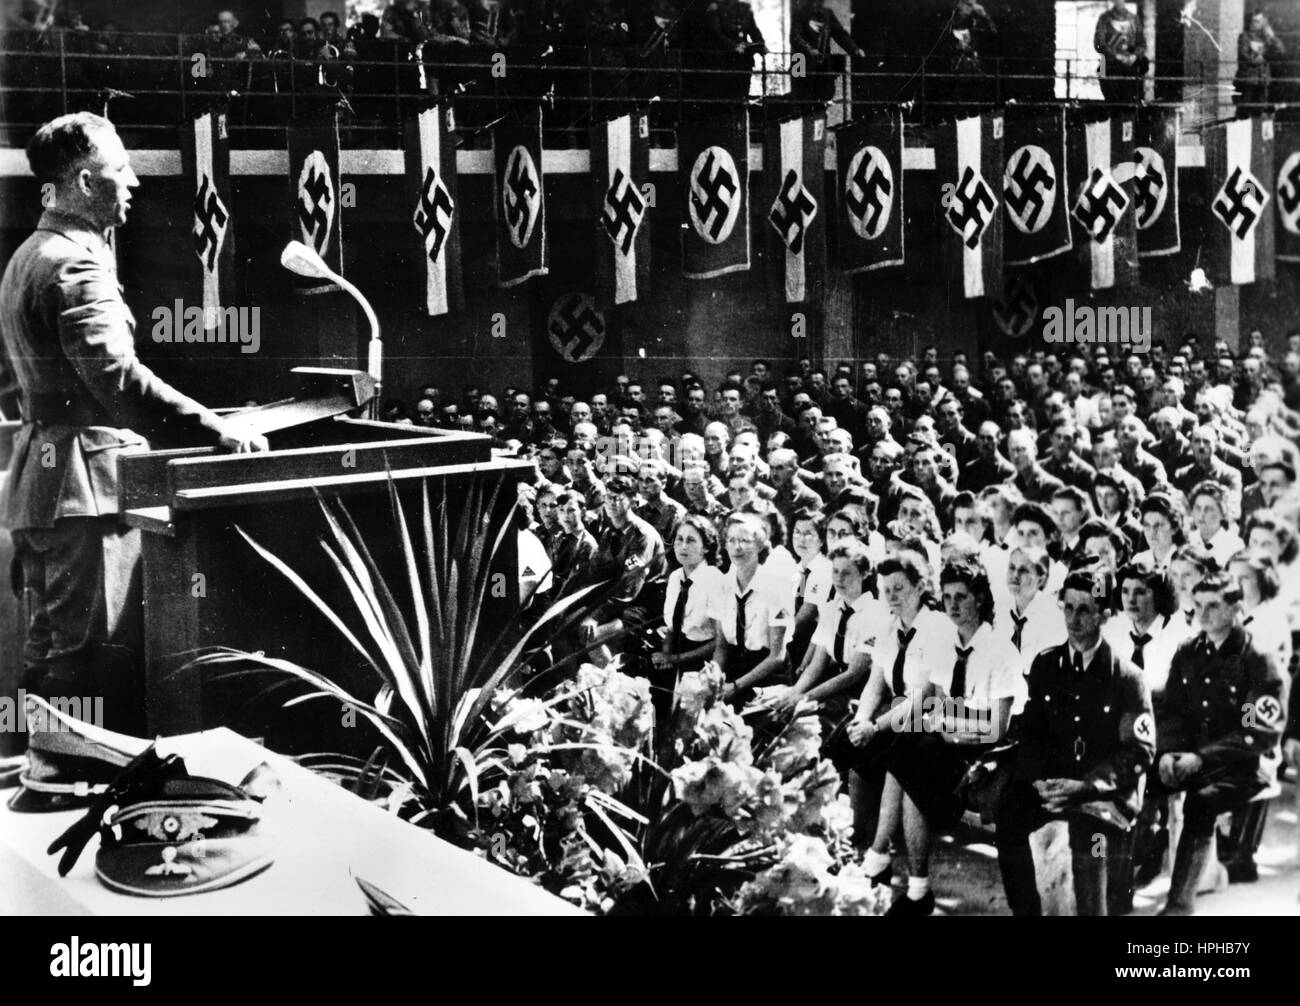 The Nazi propaganda image shows the Chief of Civil Affairs in Luxembourg, Gustav Simon, during his speech to mark the occasion of several specially-selected members of the Luxembourgian Volksdeutsche Bewegung (German People's Movement) being awarded German citizenship in Luxembourg (city). Taken in September 1942. The Nazi propaganda on the reverse of the picture reads, 'Luxembourgians become Germans of the Reich. During a major German People's Movement rally, Gustav Simons, Chief of Civil Affairs in Luxembourg, awarded honoured ethnic Germans with German Reich citizenship in front of around 9 Stock Photo